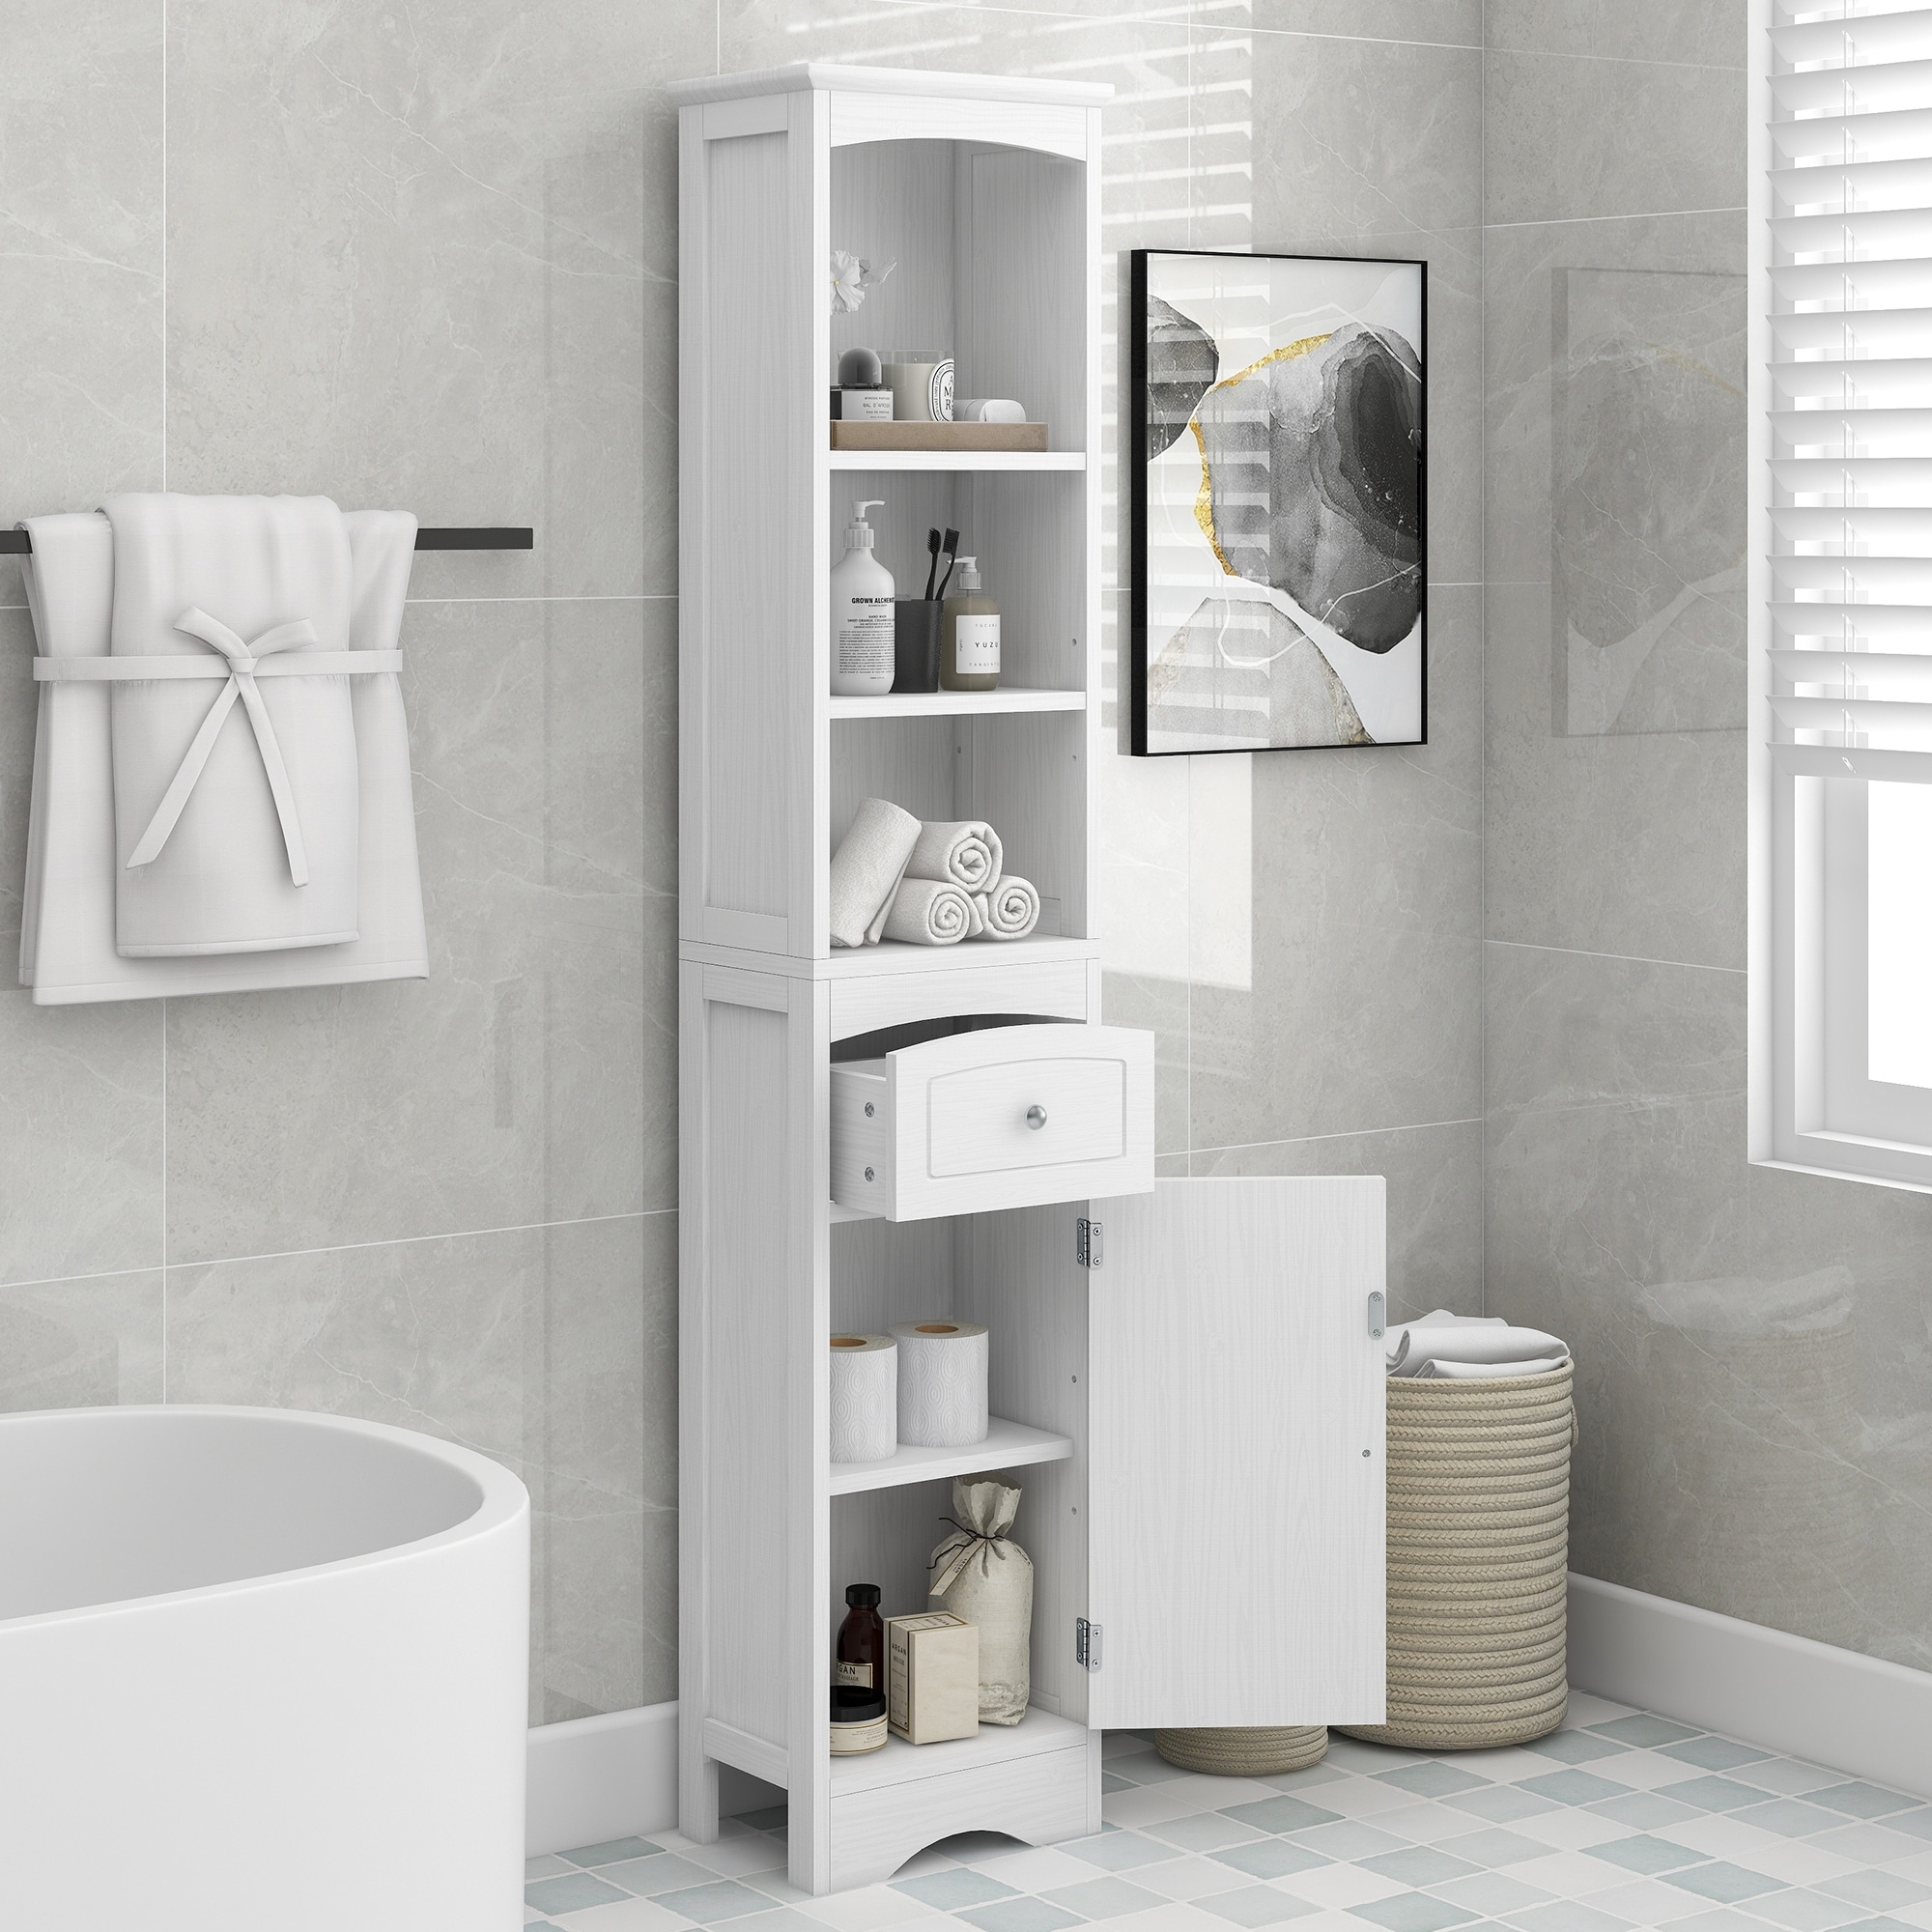 https://ak1.ostkcdn.com/images/products/is/images/direct/9c0a5056d1e1714314f4a916bca8c9276d37cc38/Nestfair-Freestanding-Bathroom-Cabinet-with-Drawer-and-Adjustable-Shelf.jpg